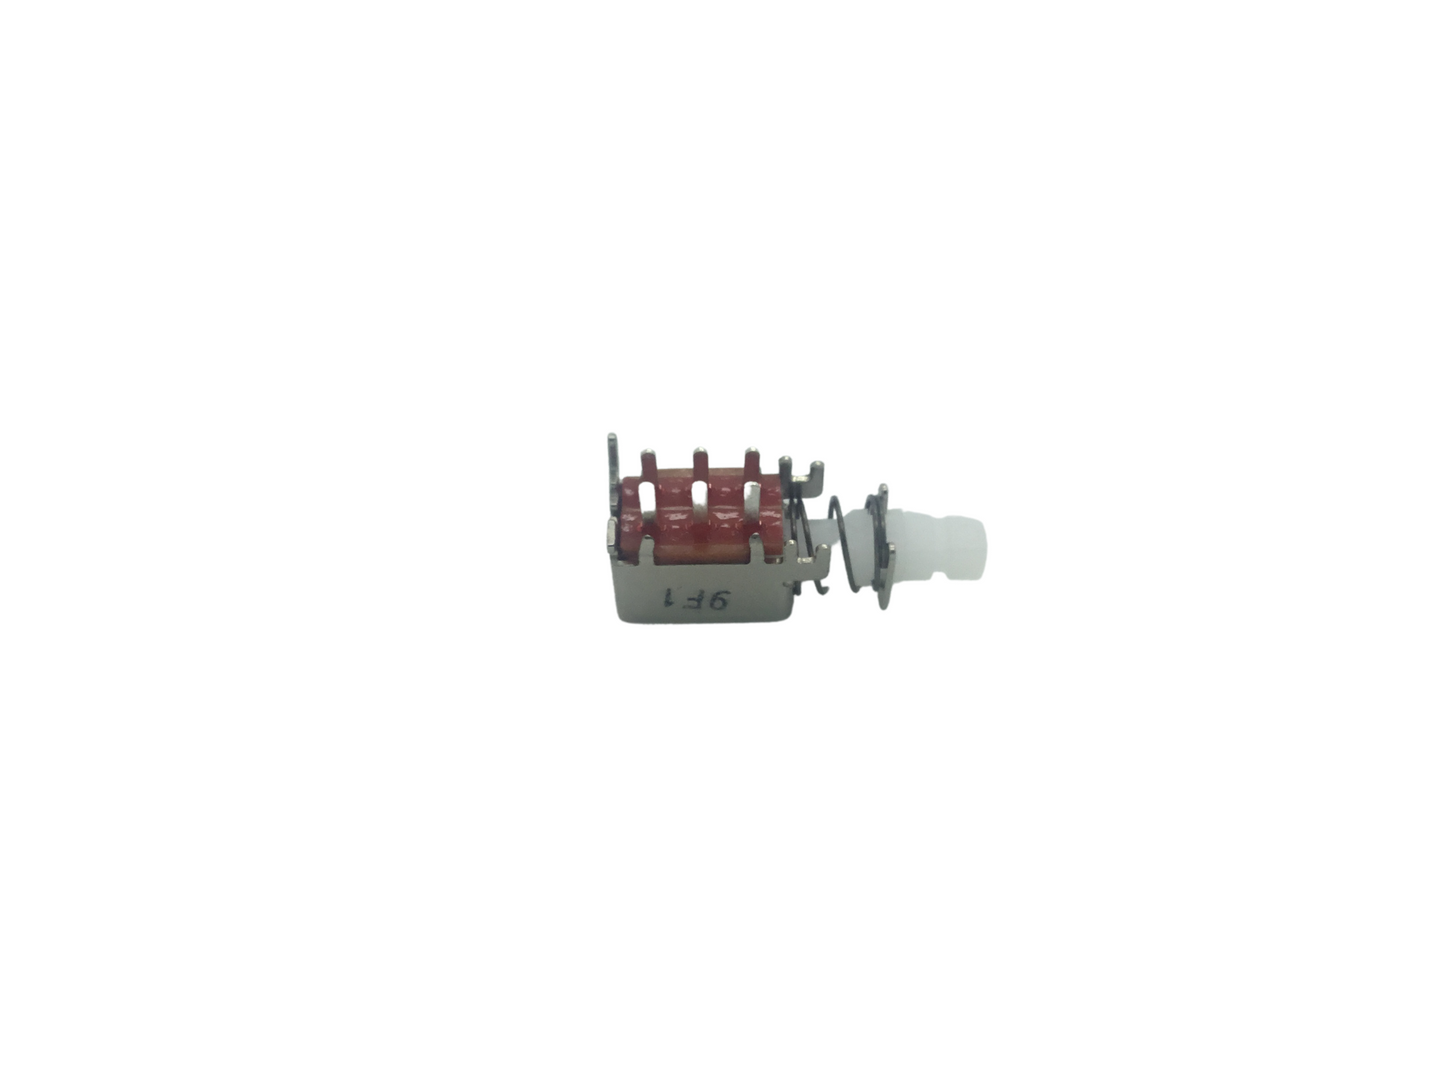 Replacement PCB Mounted Power Switch for WT-5800 and WT-5805